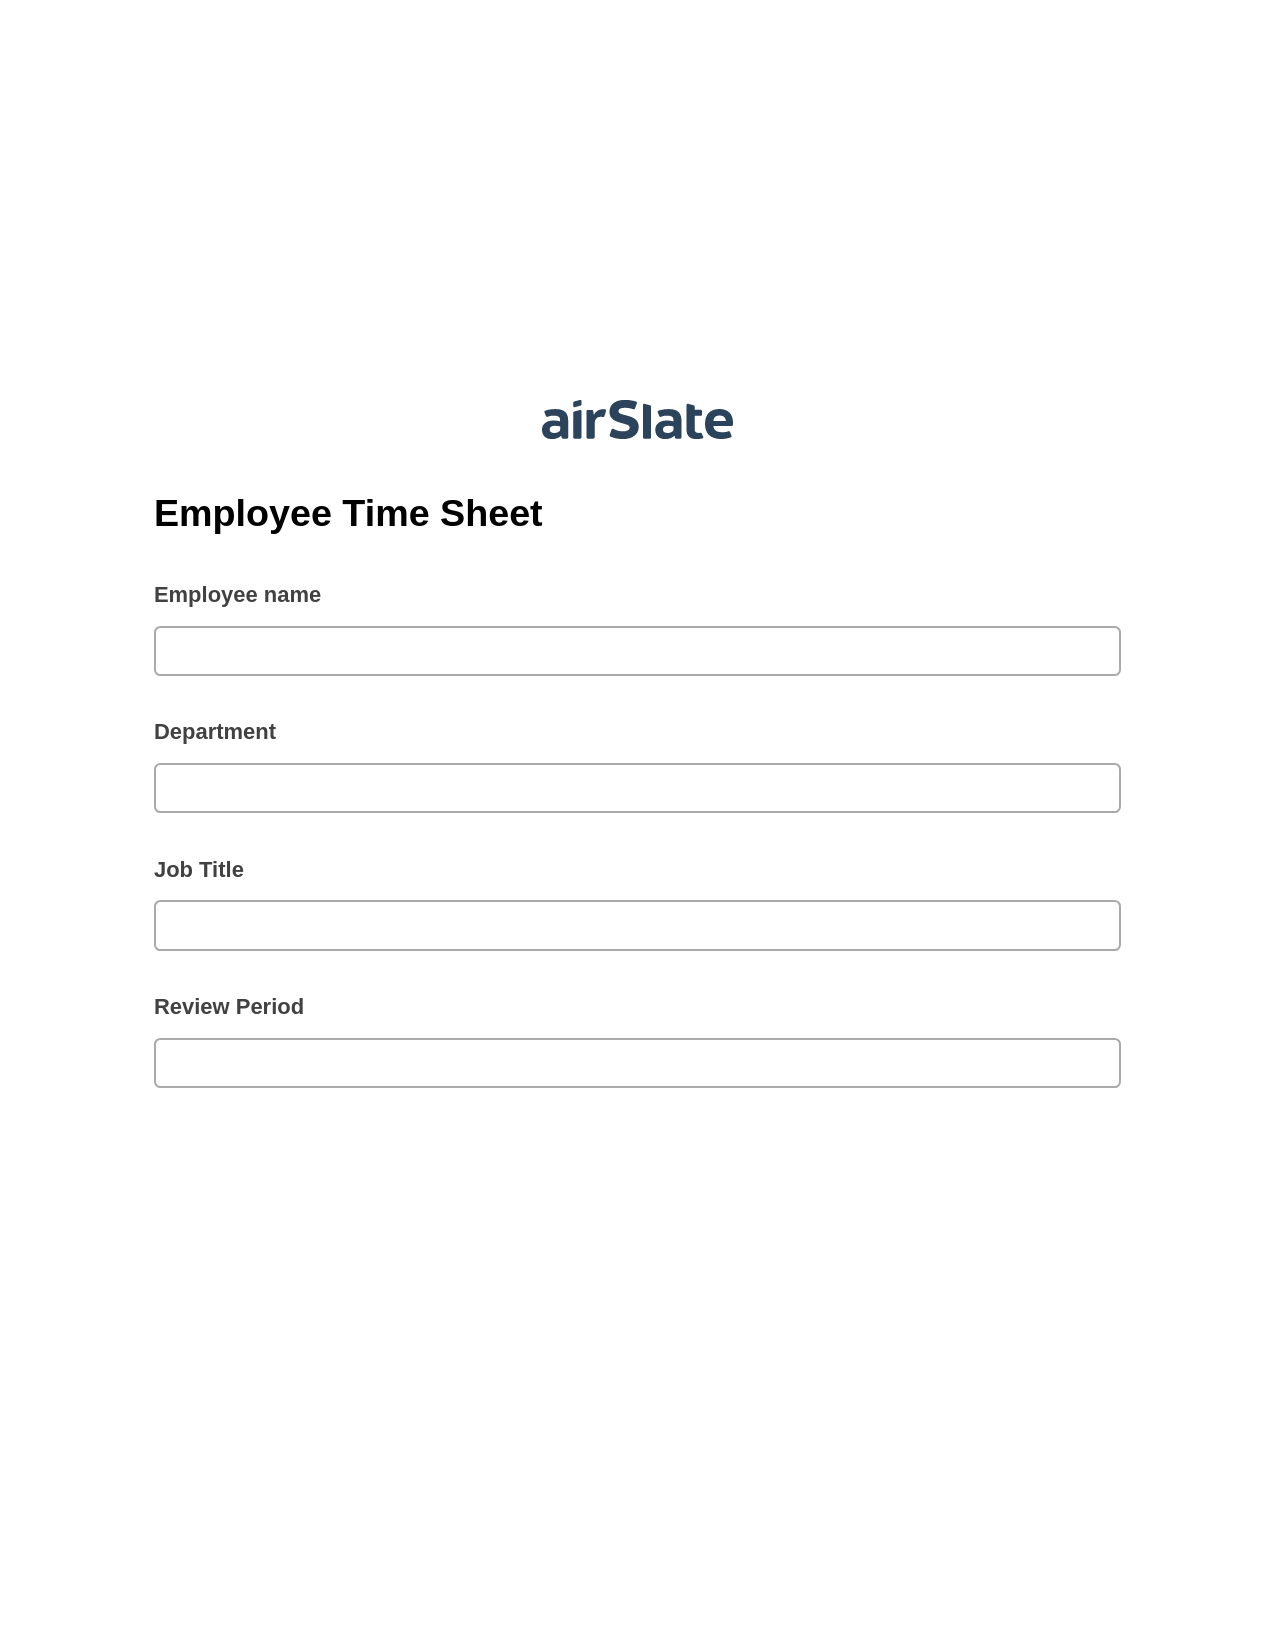 Multirole Employee Time Sheet Pre-fill from Office 365 Excel Bot, Create slate addon, Archive to Box Bot